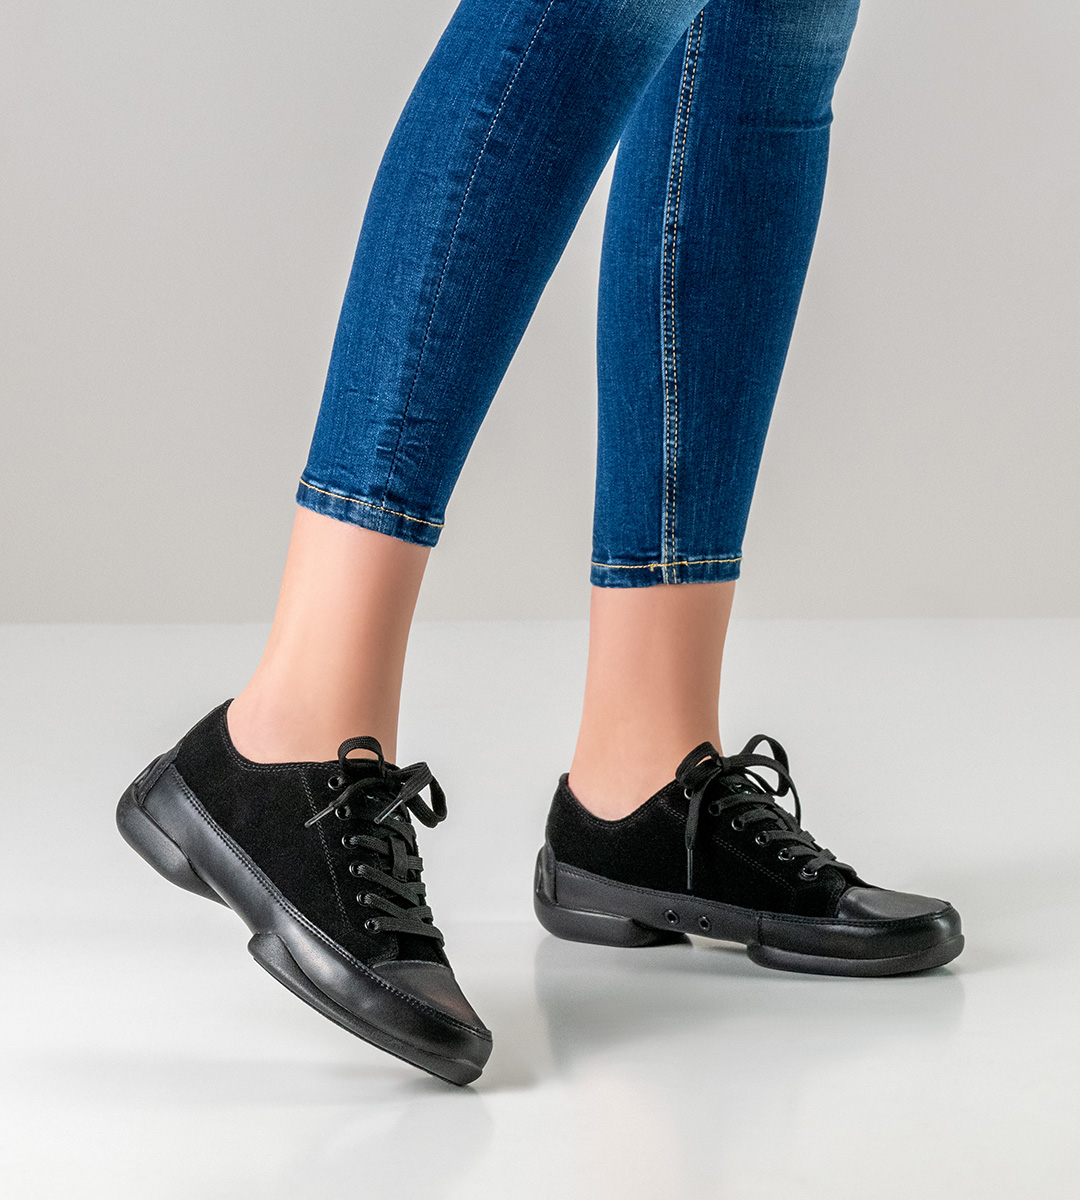 blue jeans in combination with black leather dance sneaker for women